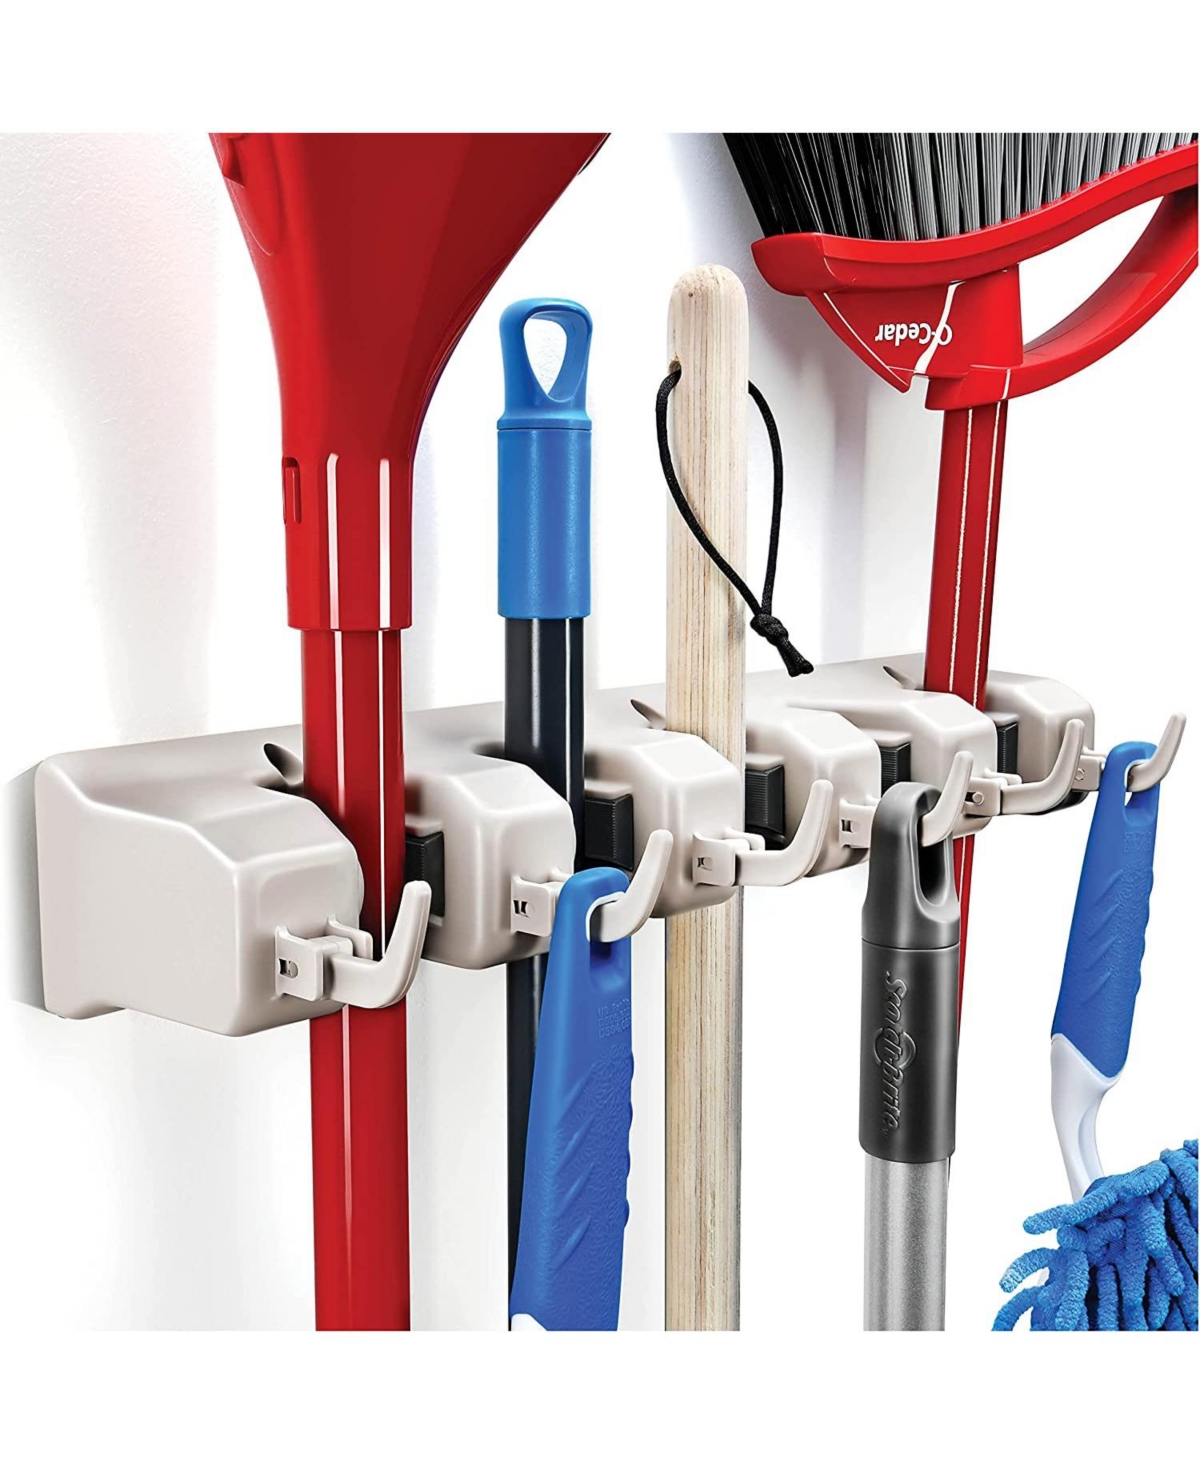 Mop And Broom Holder - Garage Storage Systems with 5 Slots, 6 Hooks, 7.5lbs Capacity Per Slot - Garden Tool Organizer For 11 Tools - For Home, Kitchen